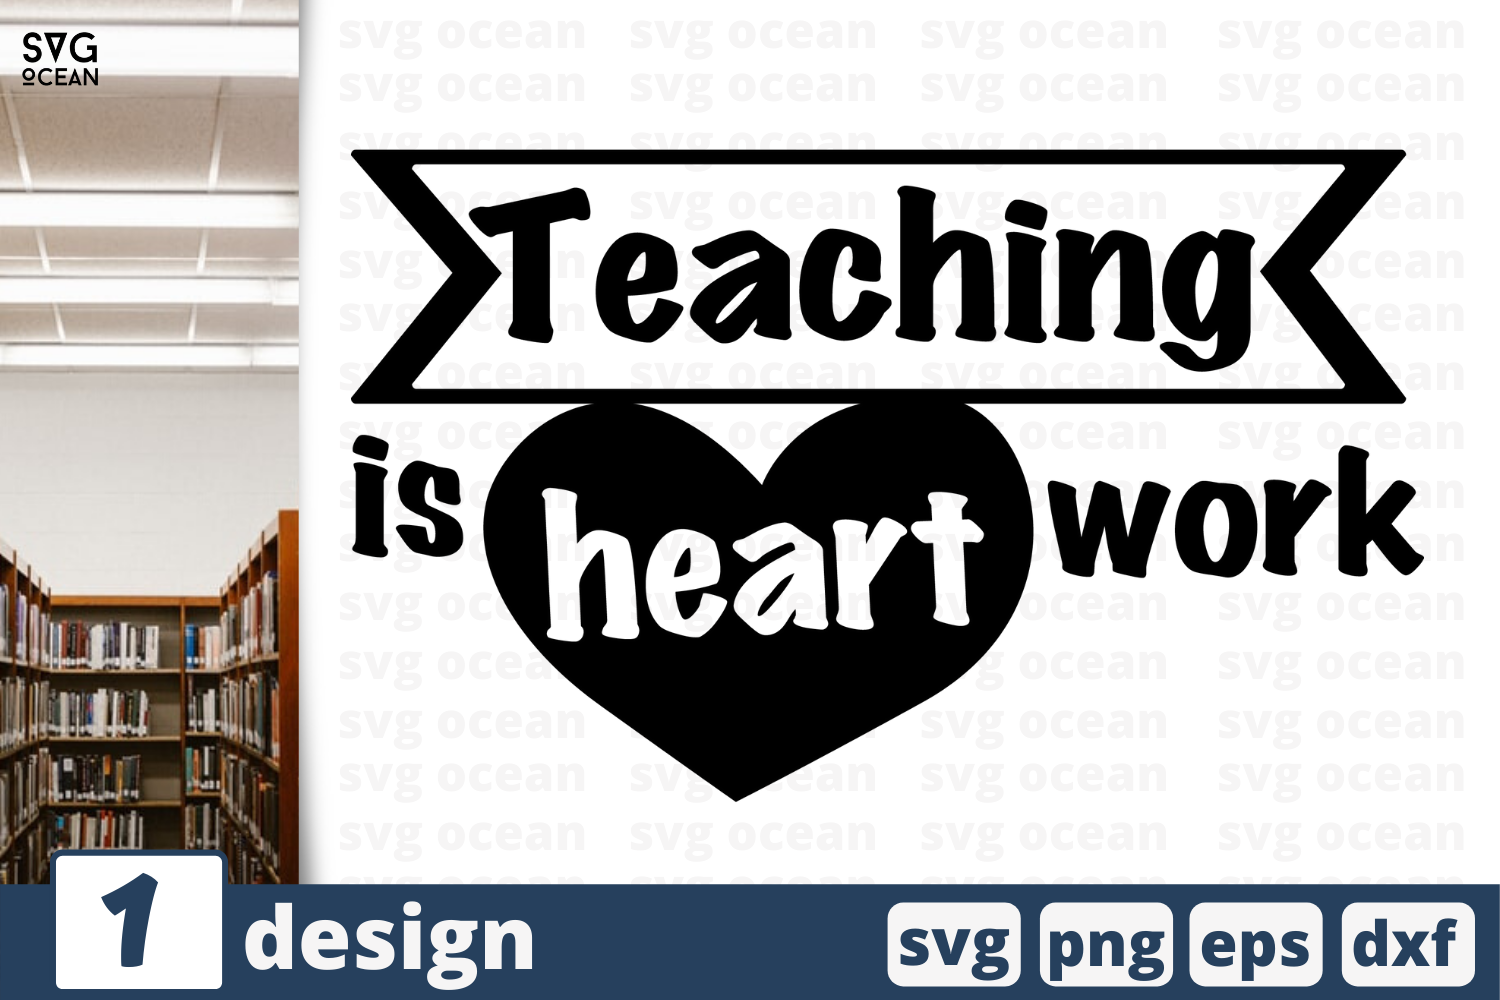 Download 1 TEACHING IS HEART WORK svg bundle, quotes cricut svg By SvgOcean | TheHungryJPEG.com